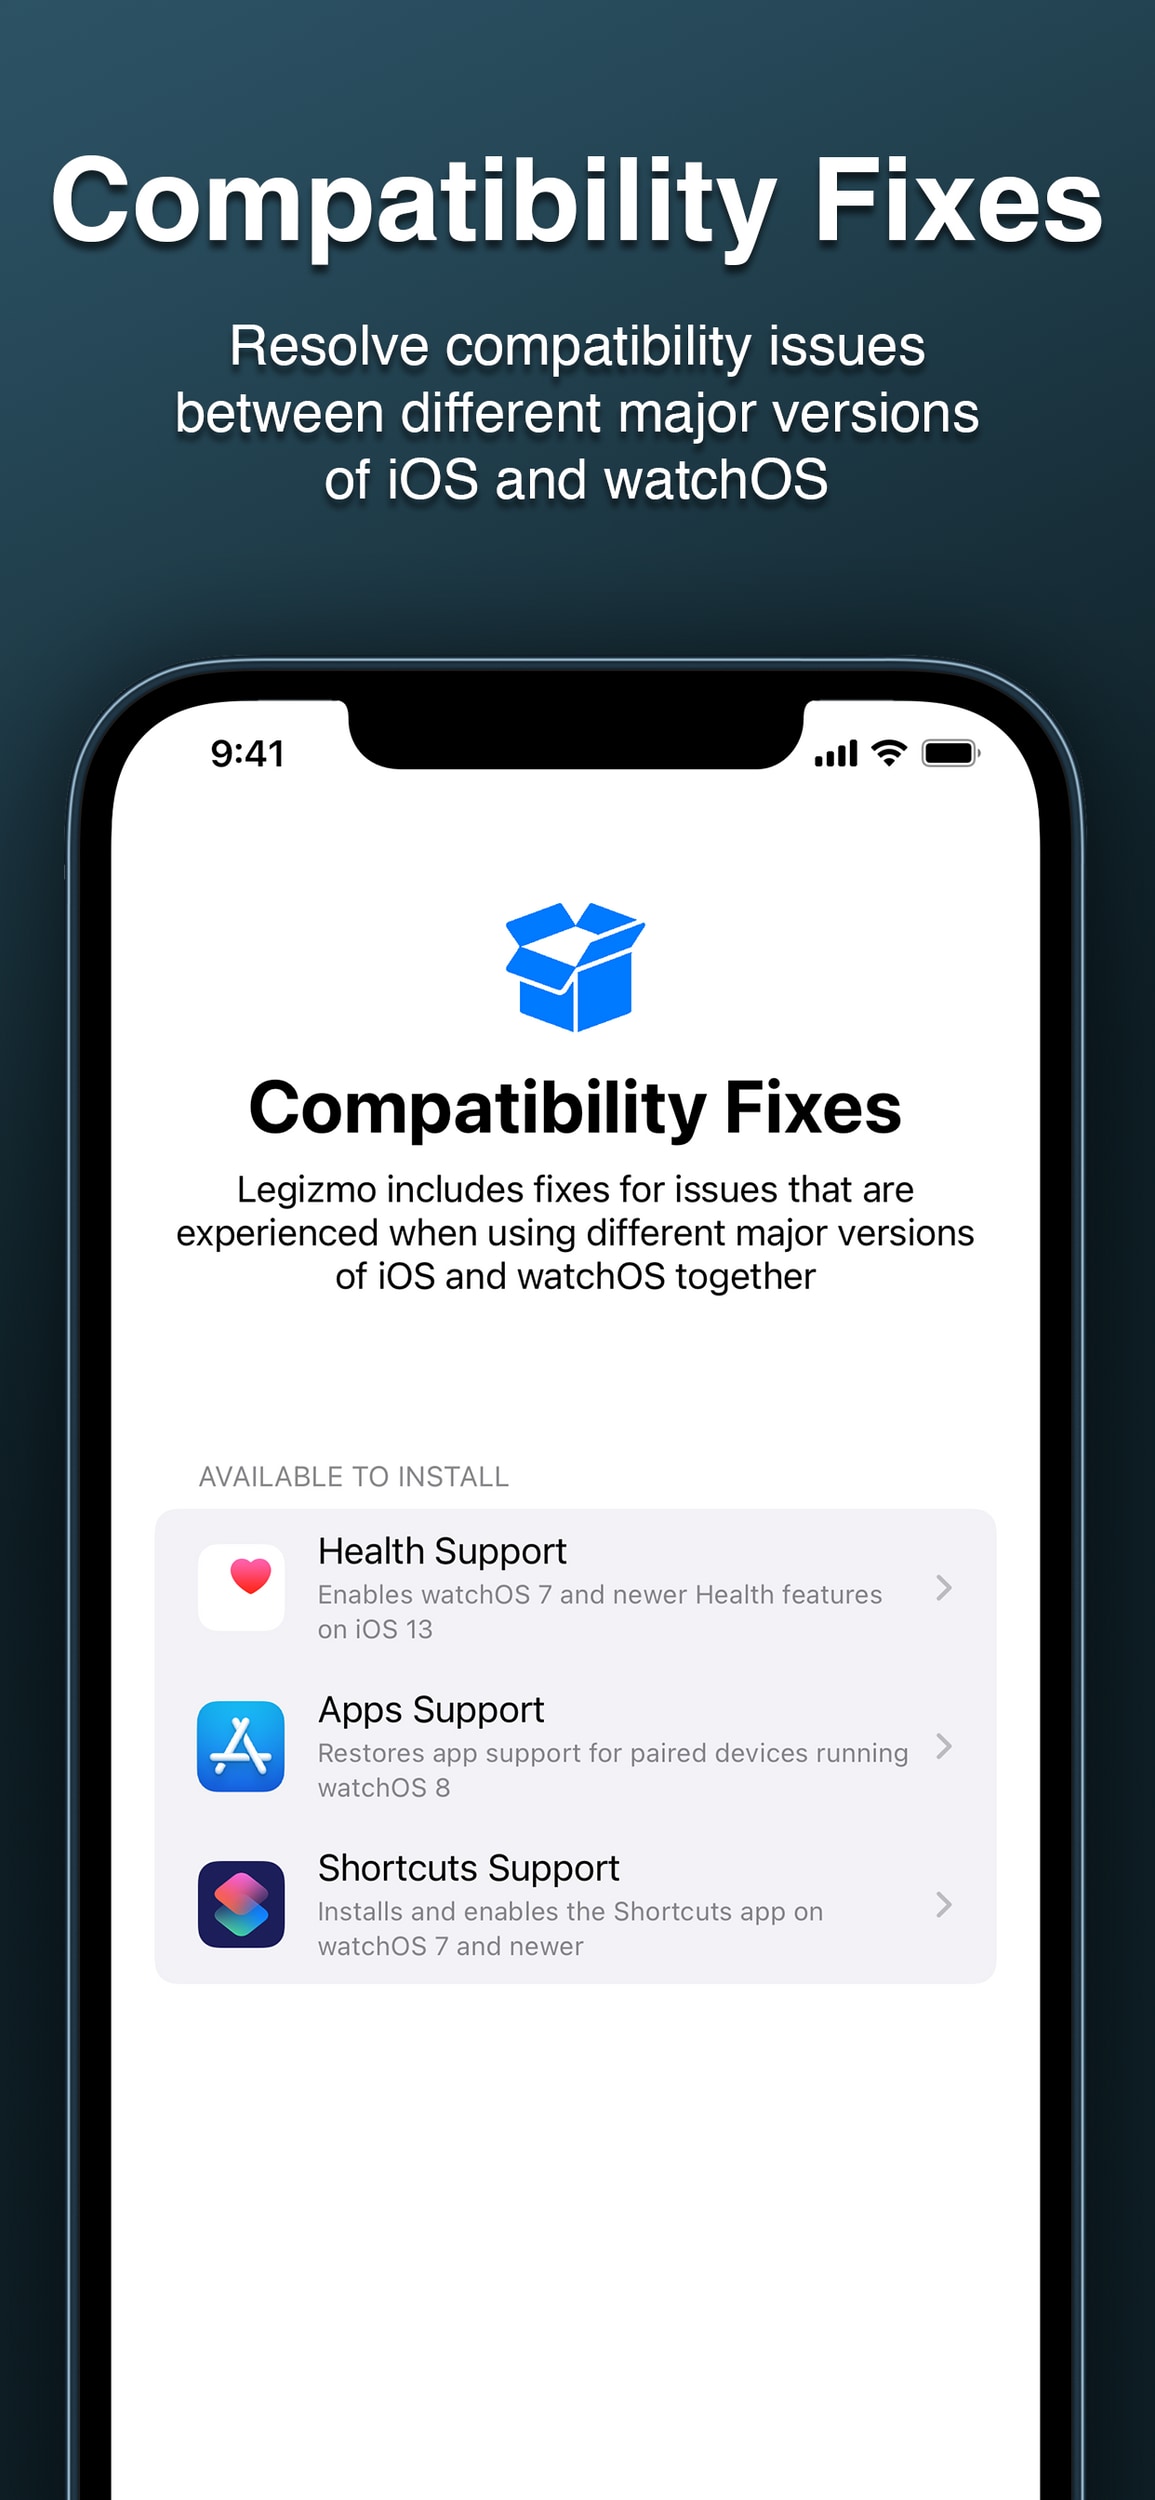 Legizmo's Compatibility Fixes screen, which allows you to resolve compatibility issues between different major versions of iOS and watchOS